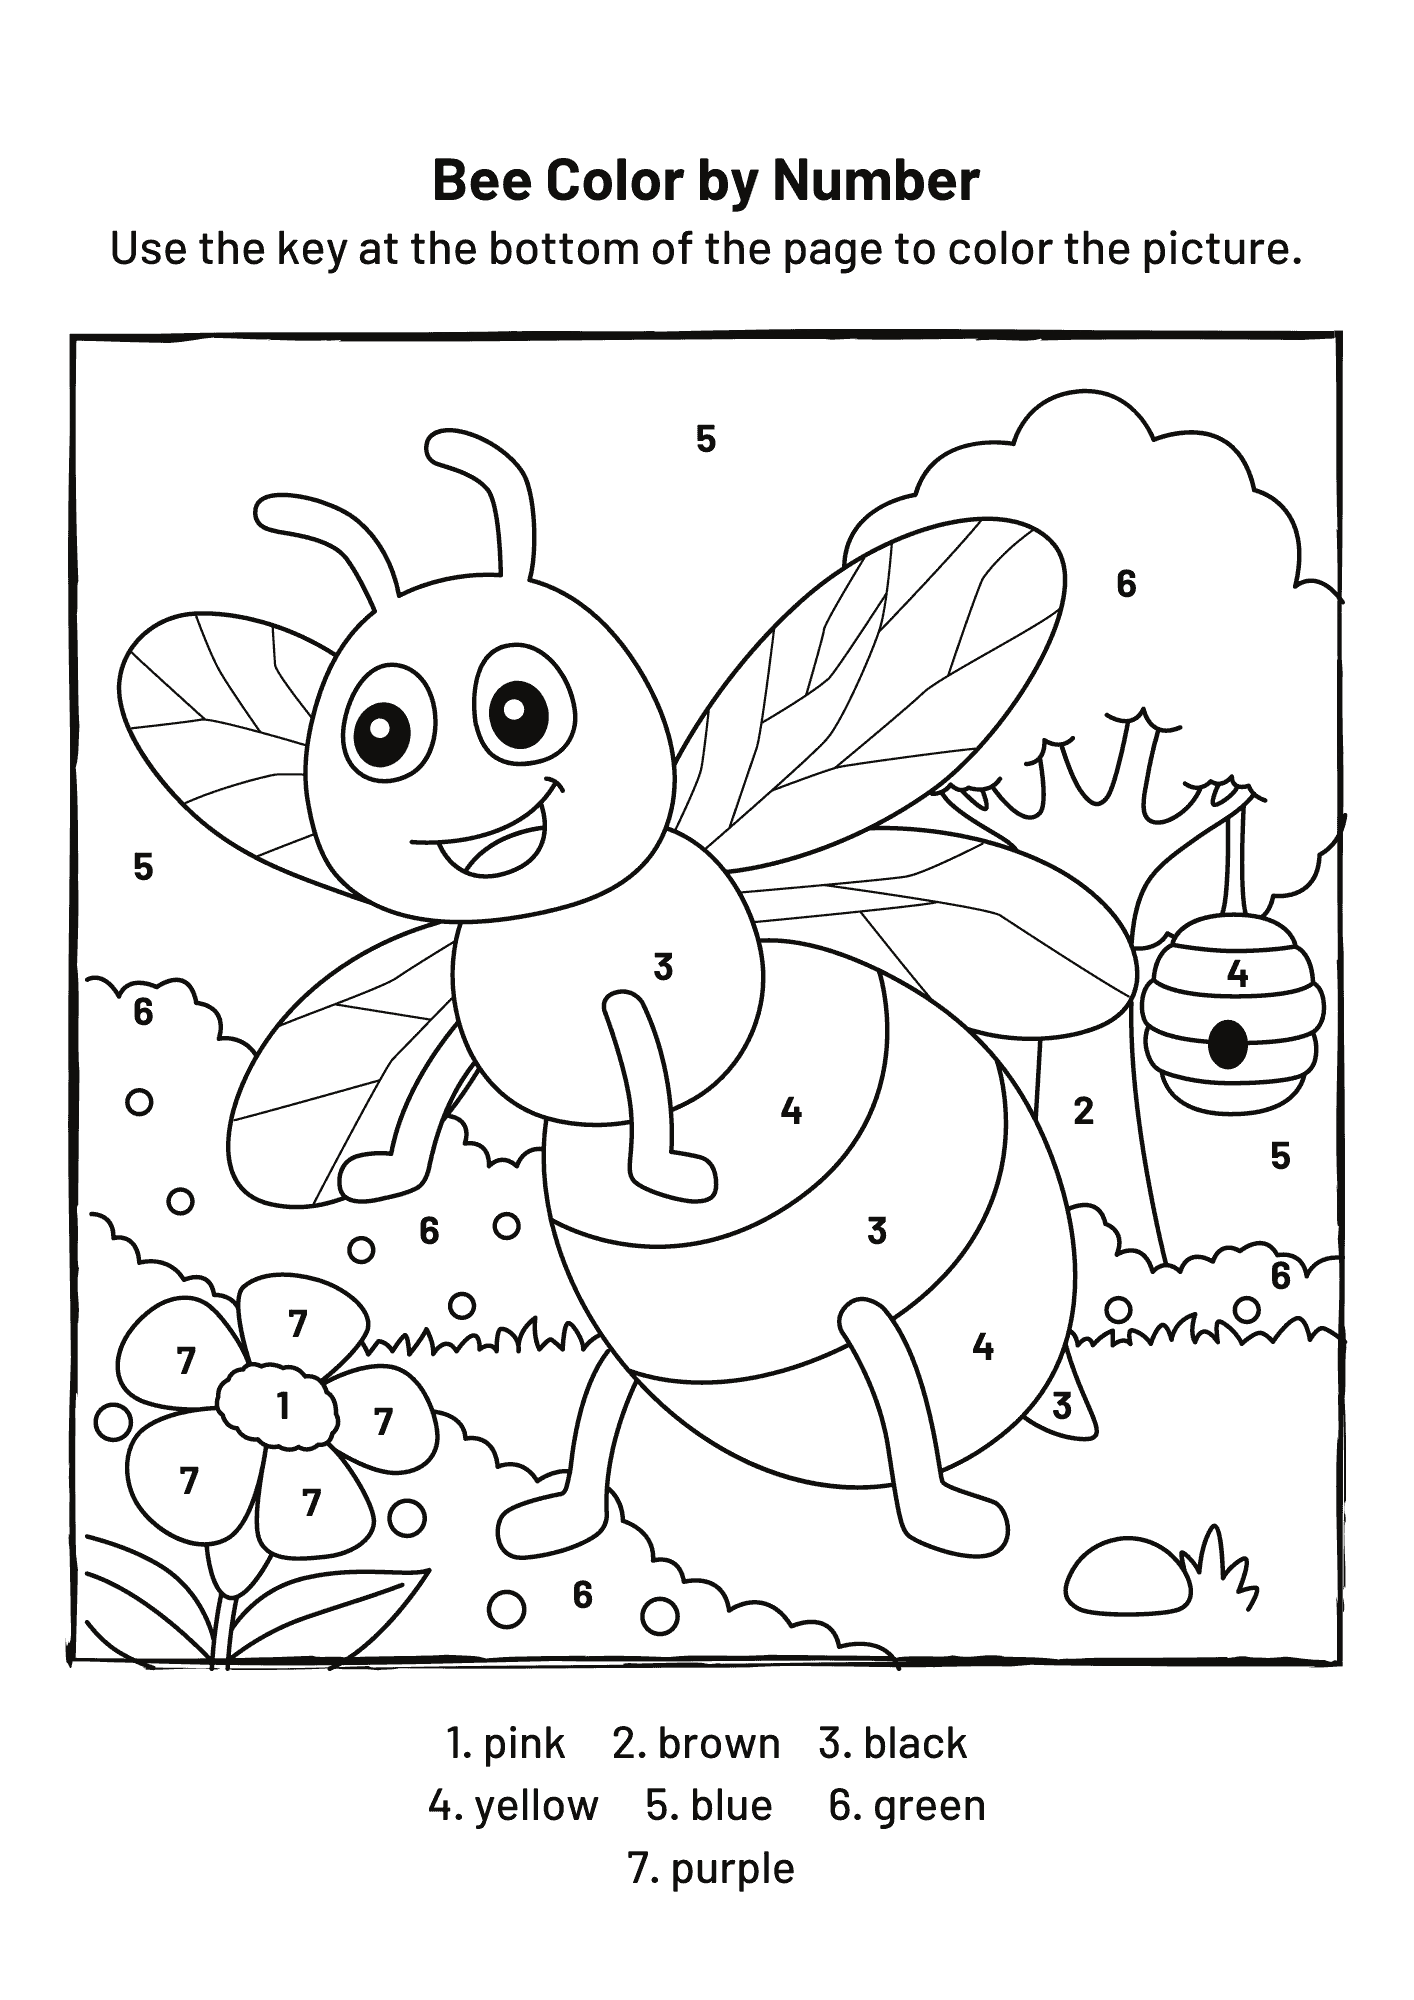 Printable Color by Number Pages for Kids - Get Coloring Pages